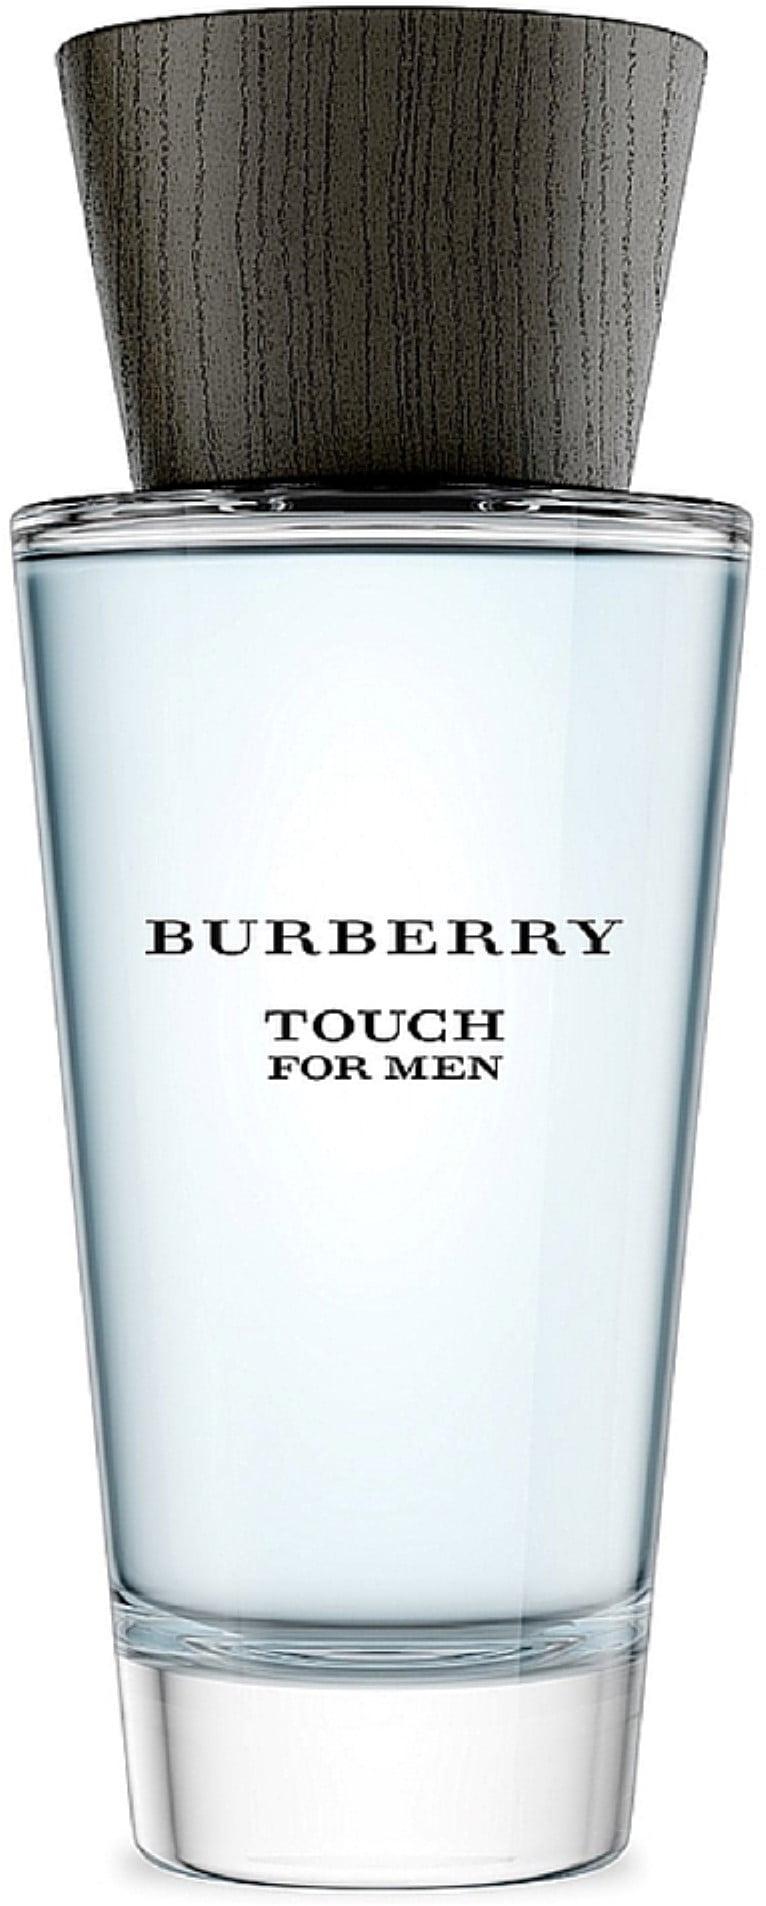 burberry touch for men smell